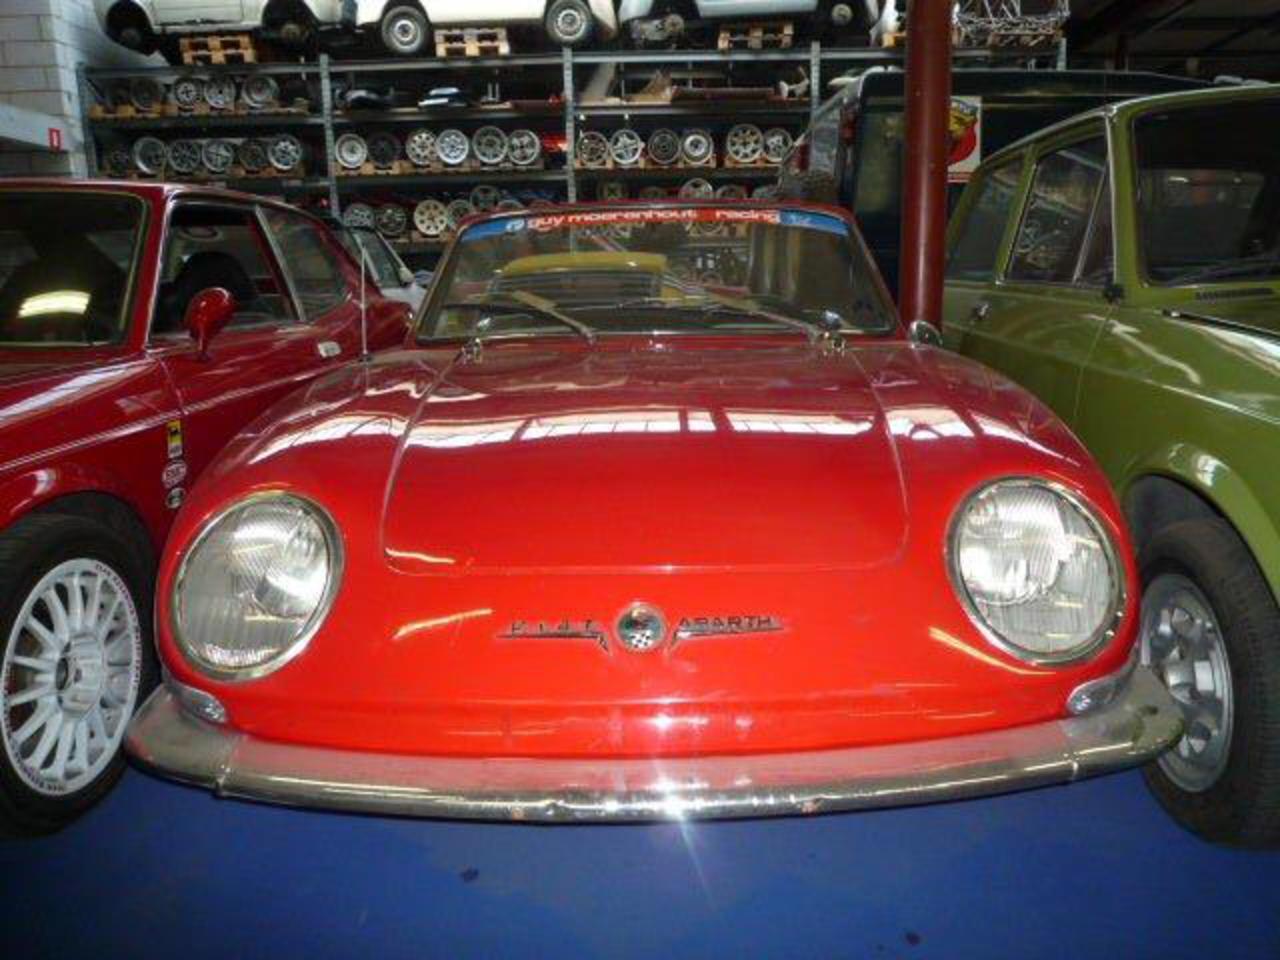 abarth works museum: ABARTH cars, parts & tuning by guy moerenhout ...